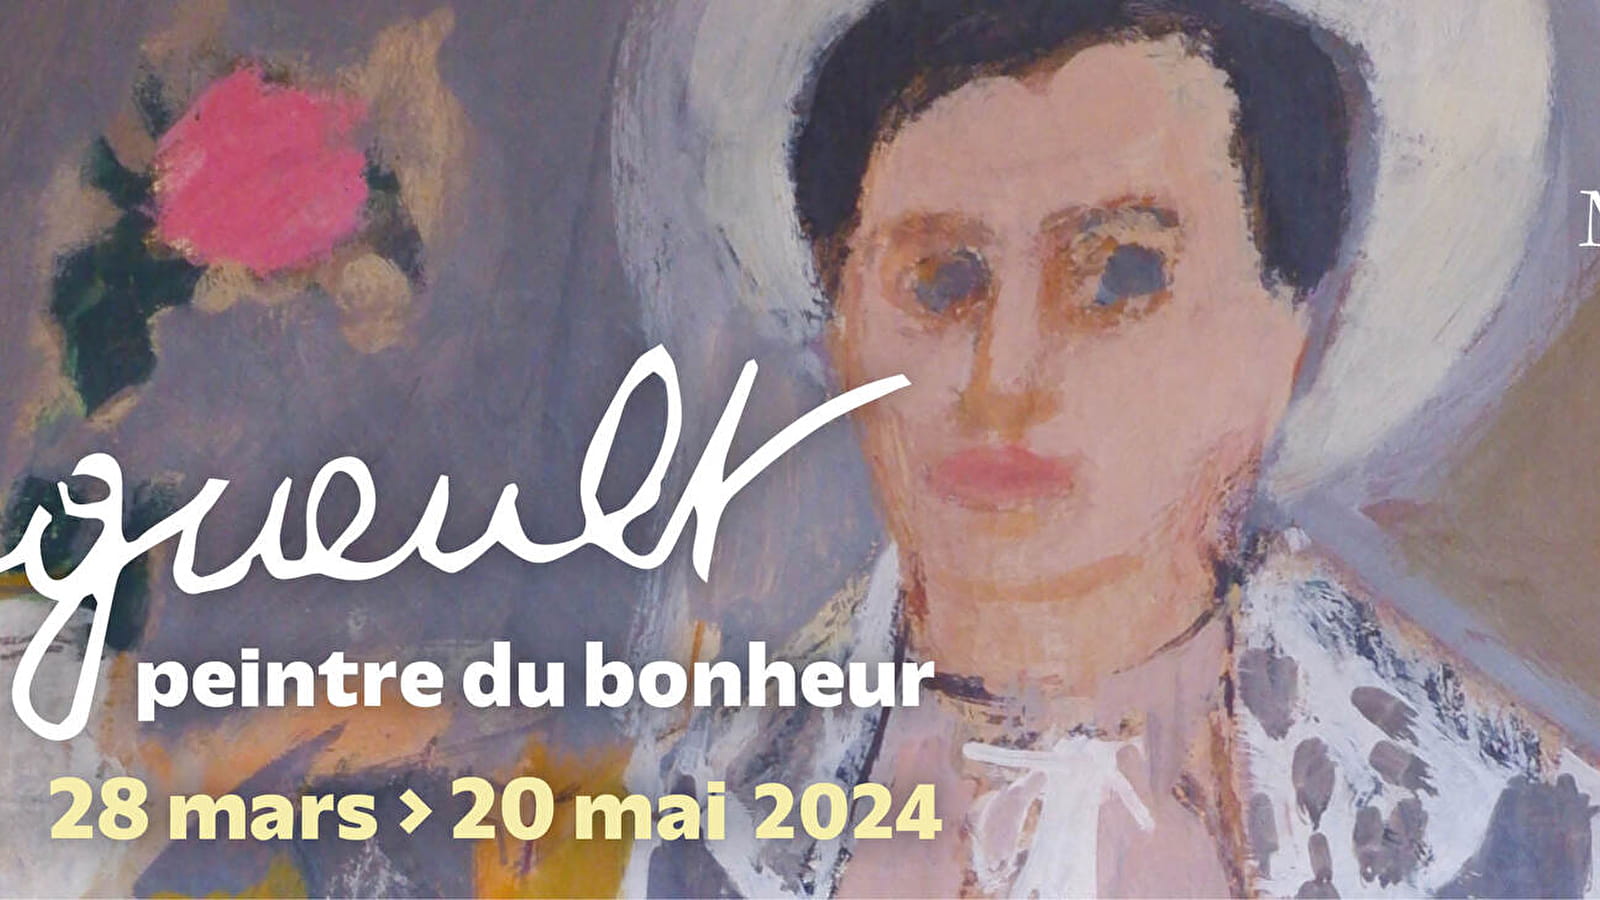 Guided tours of the exhibition Raymond Legueult: Painter of Happiness